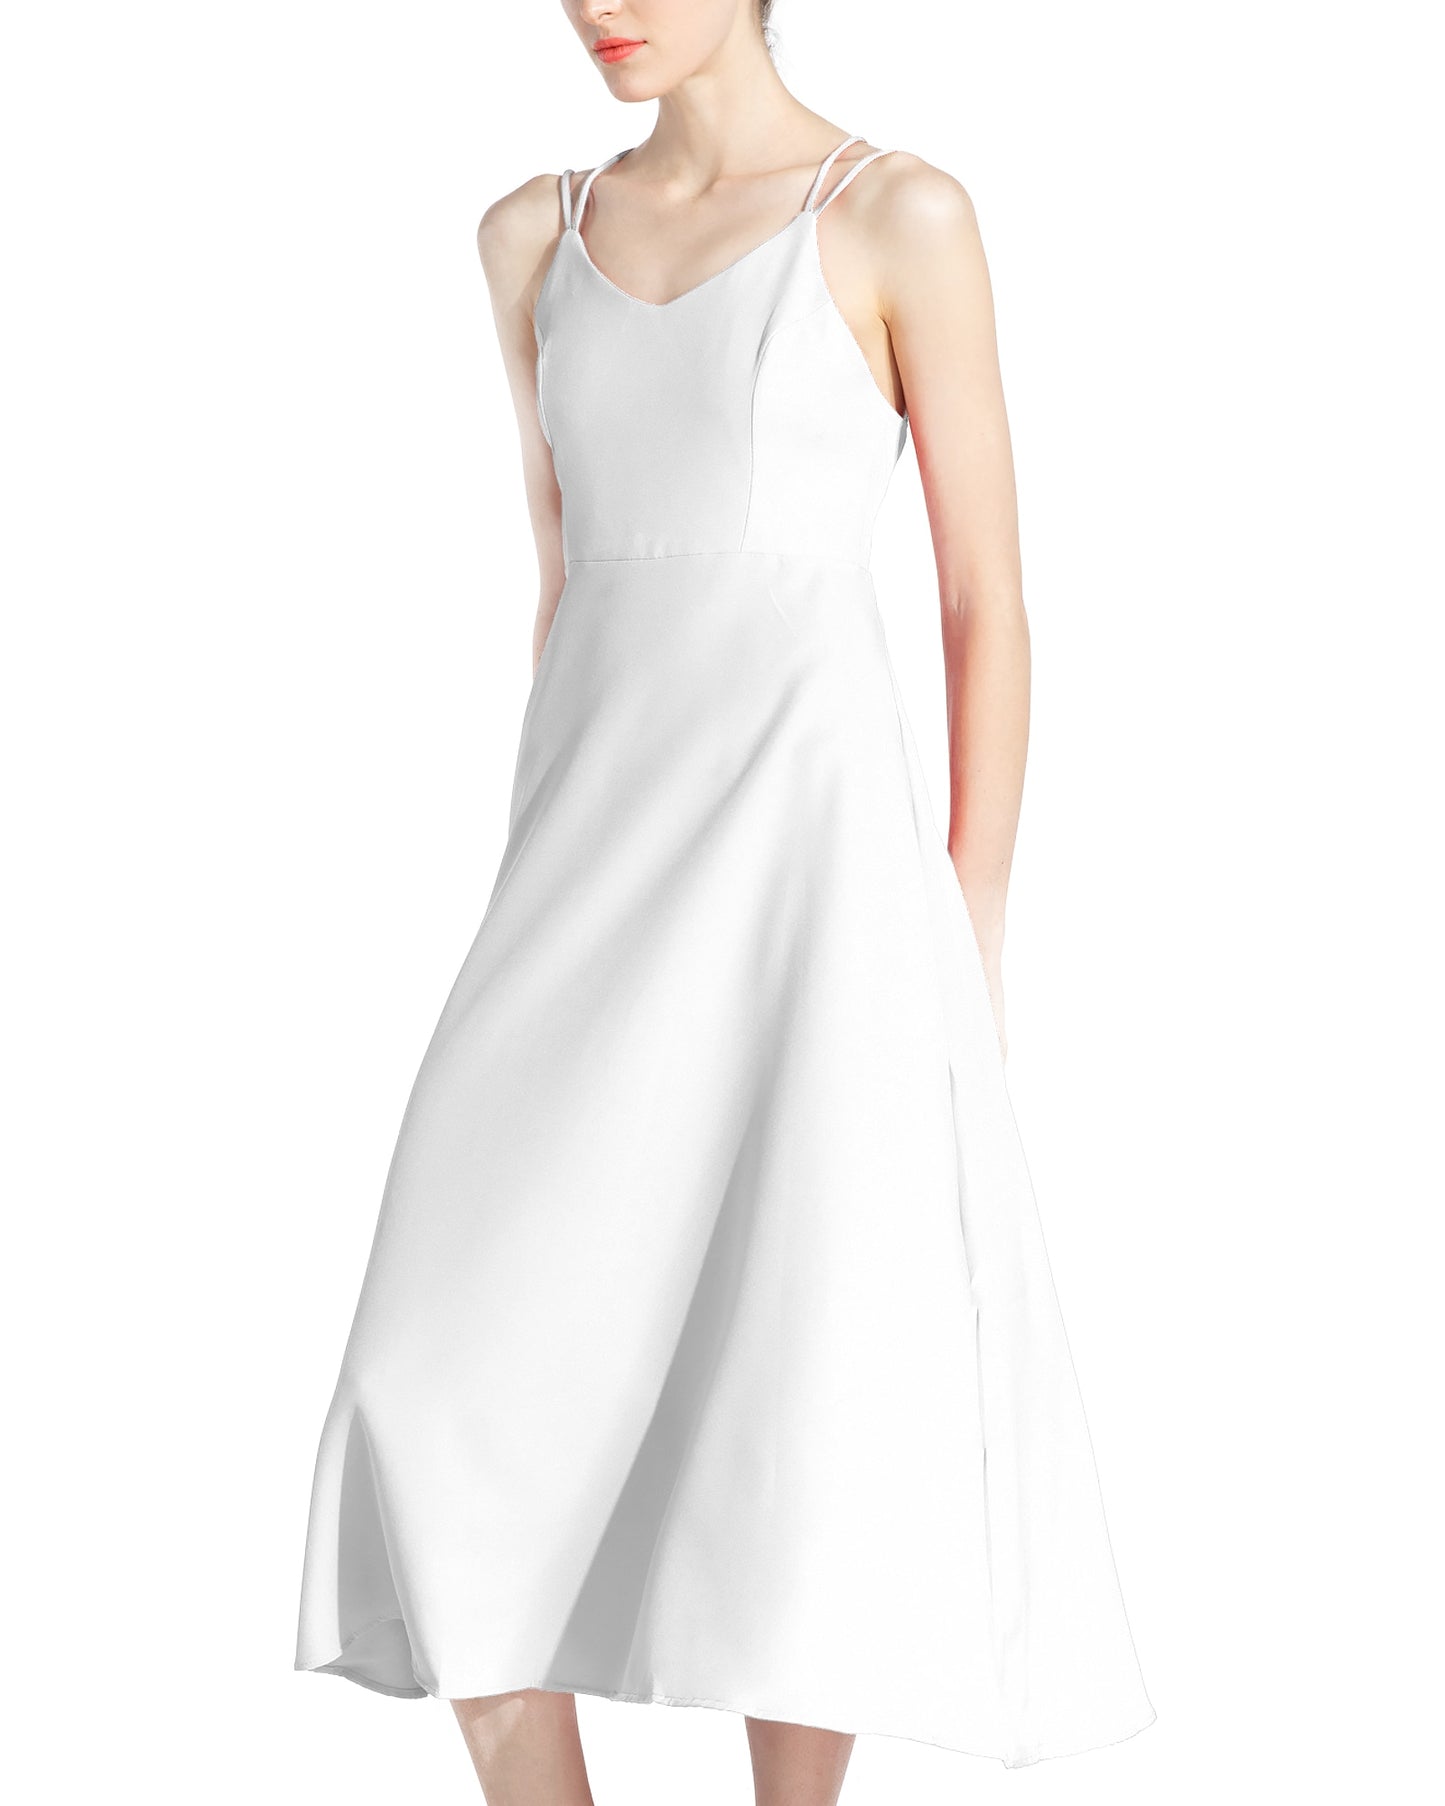 New-Coming Spring Summer Holiday Long Ankle-Length Women Dresses - WD8191